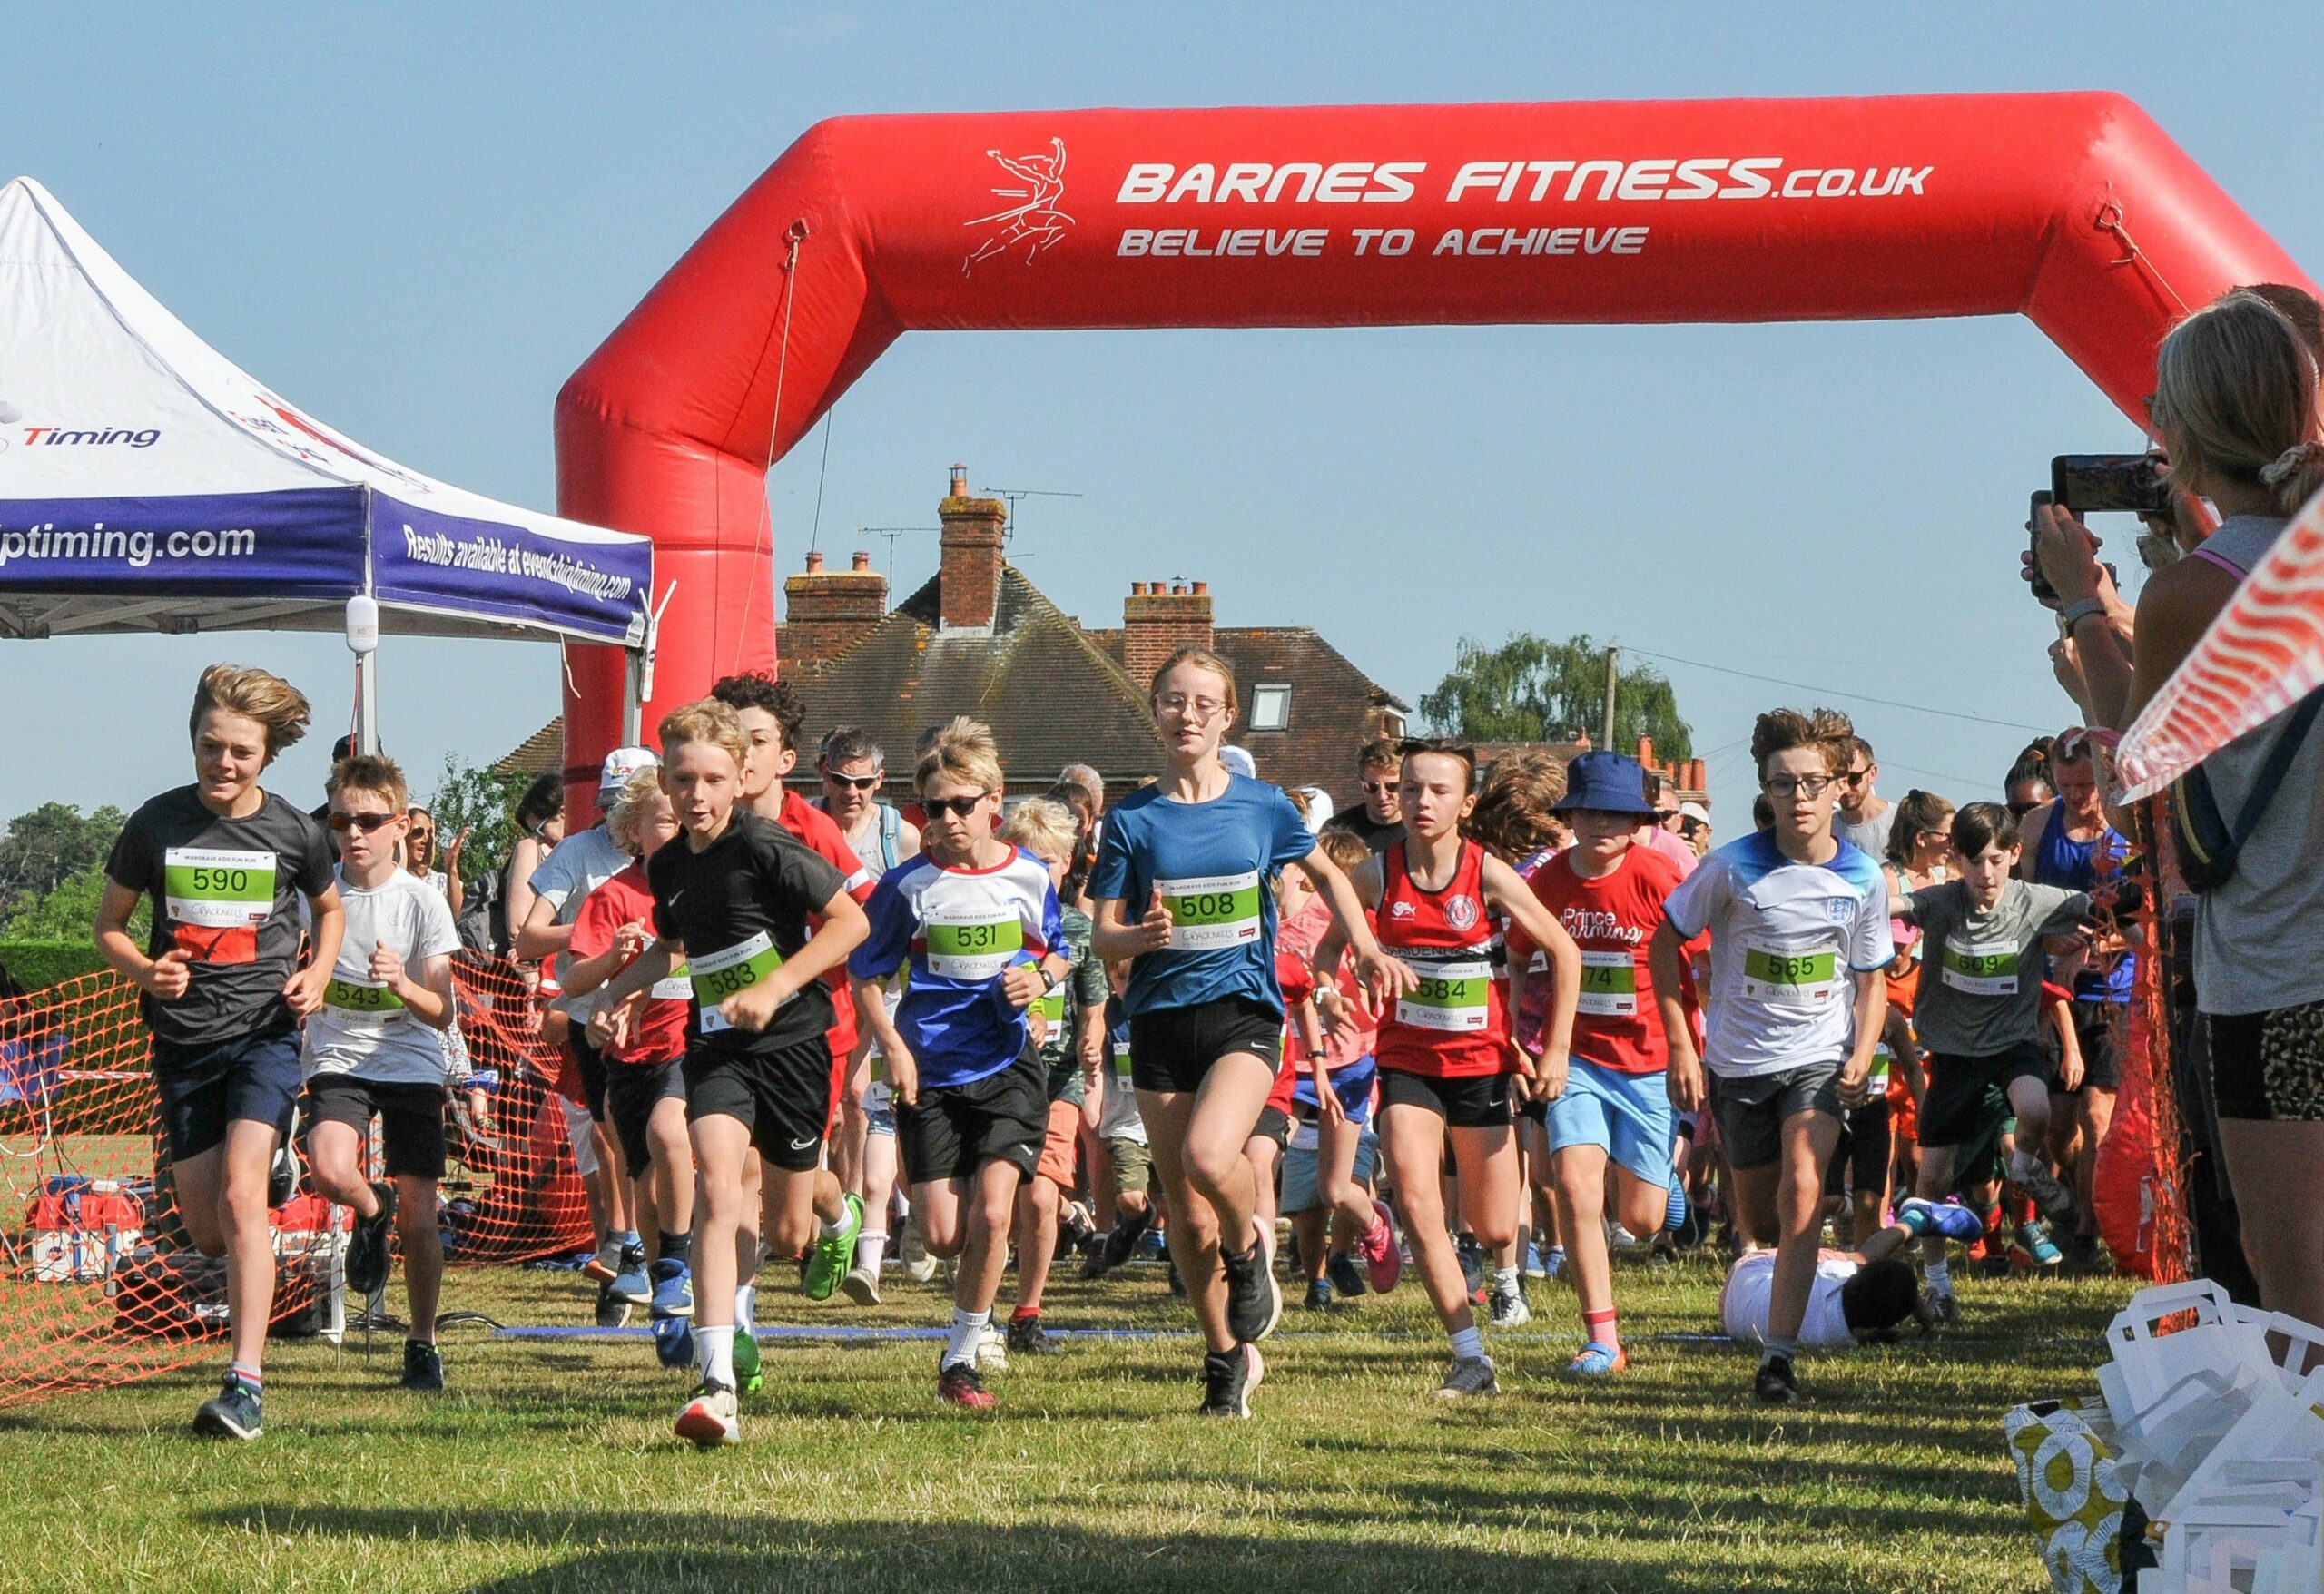 Enter now for Wargrave run – Wokingham.Today 